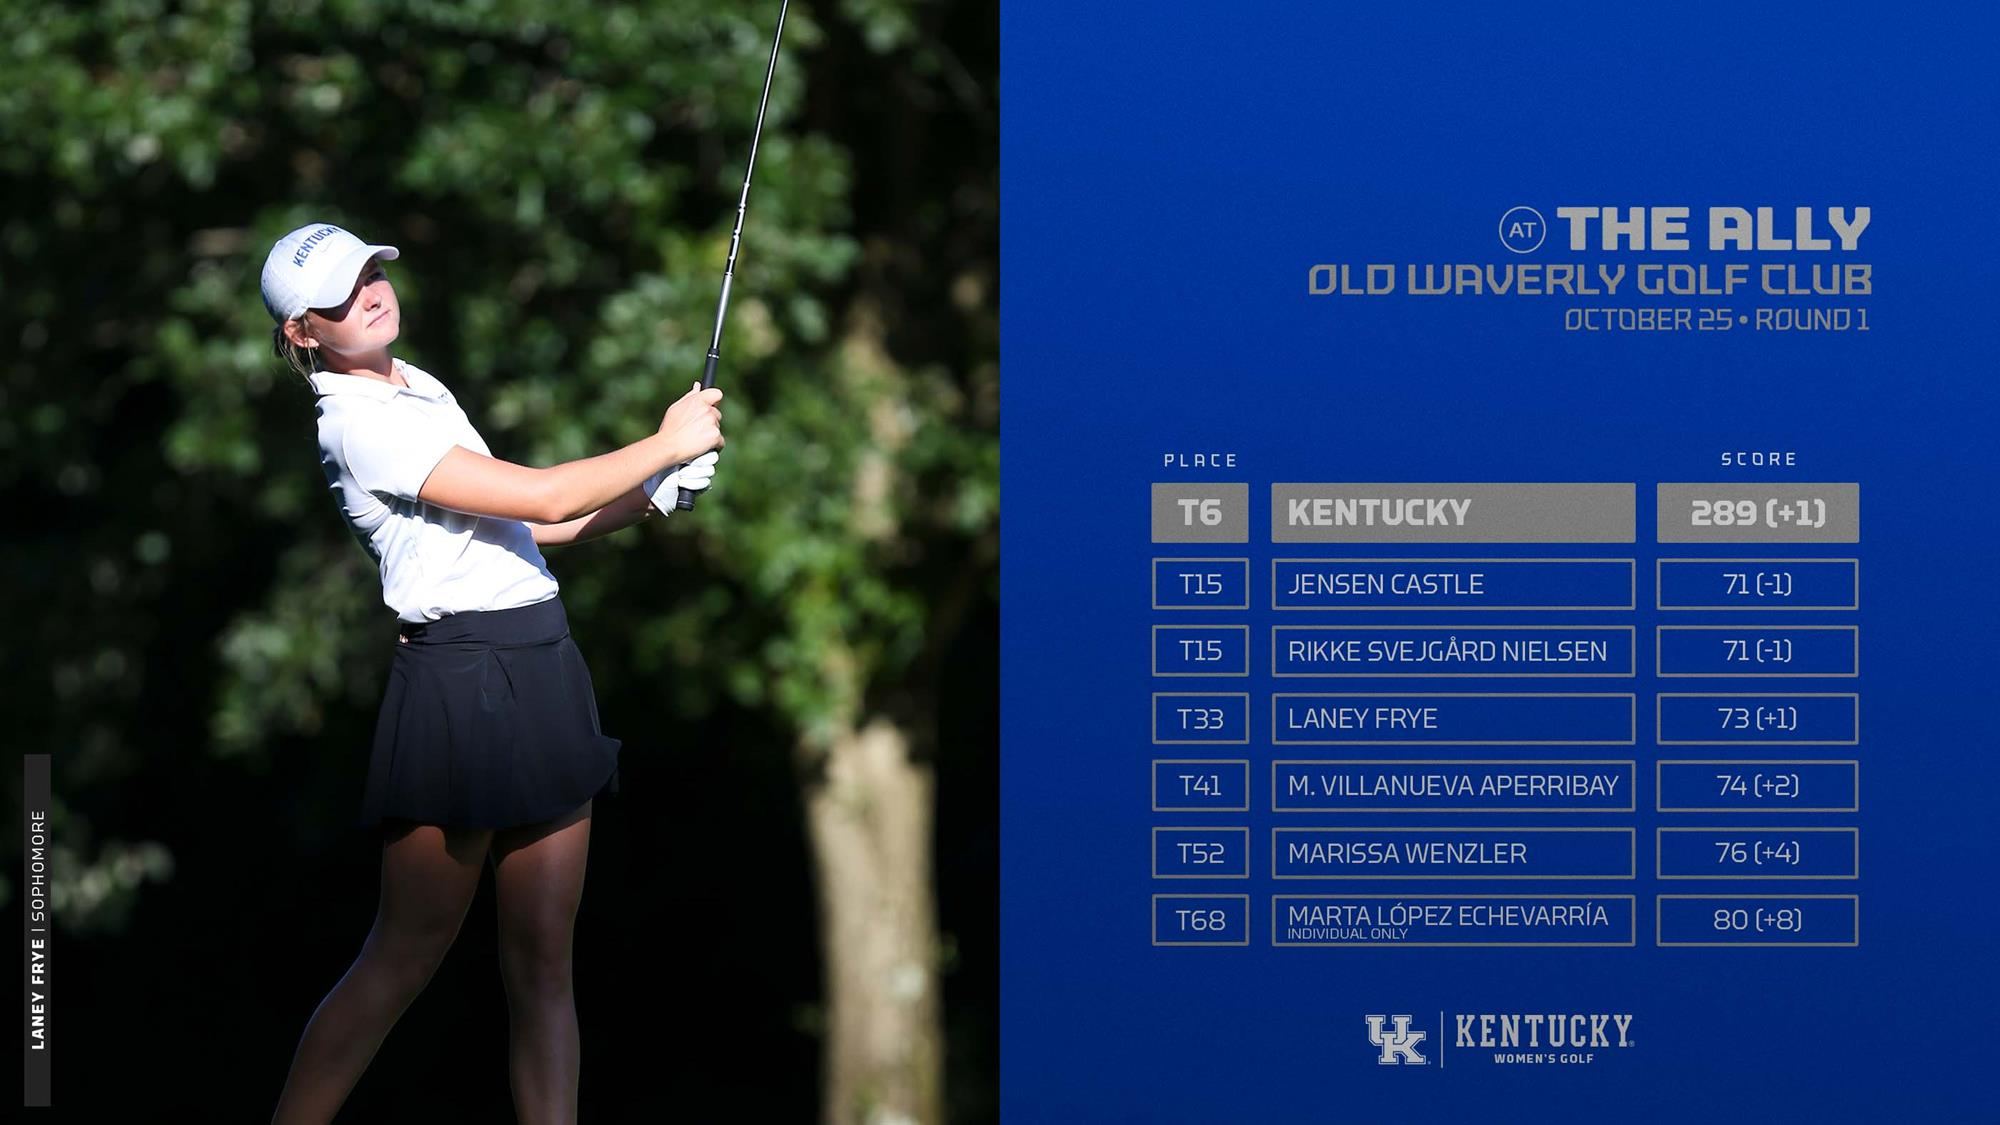 UK Women’s Golf in Middle of the Pack After Day One at The Ally